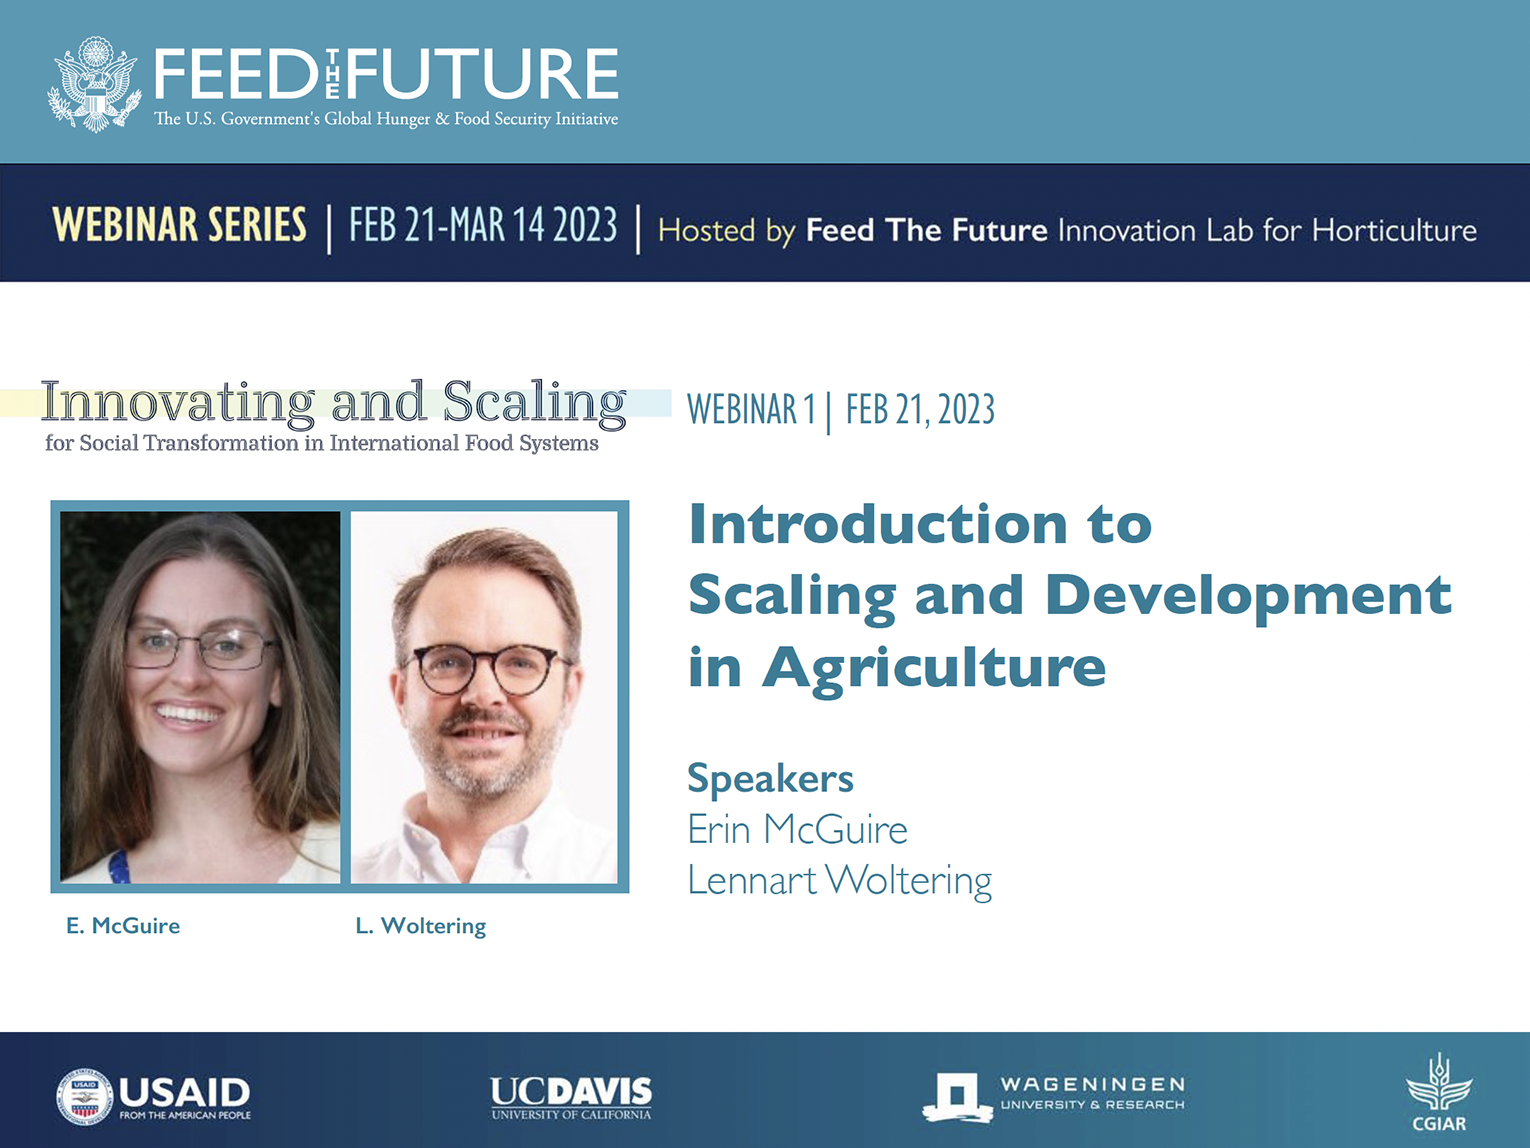 Webinar 1: Introduction to Scaling and Development in Agriculture